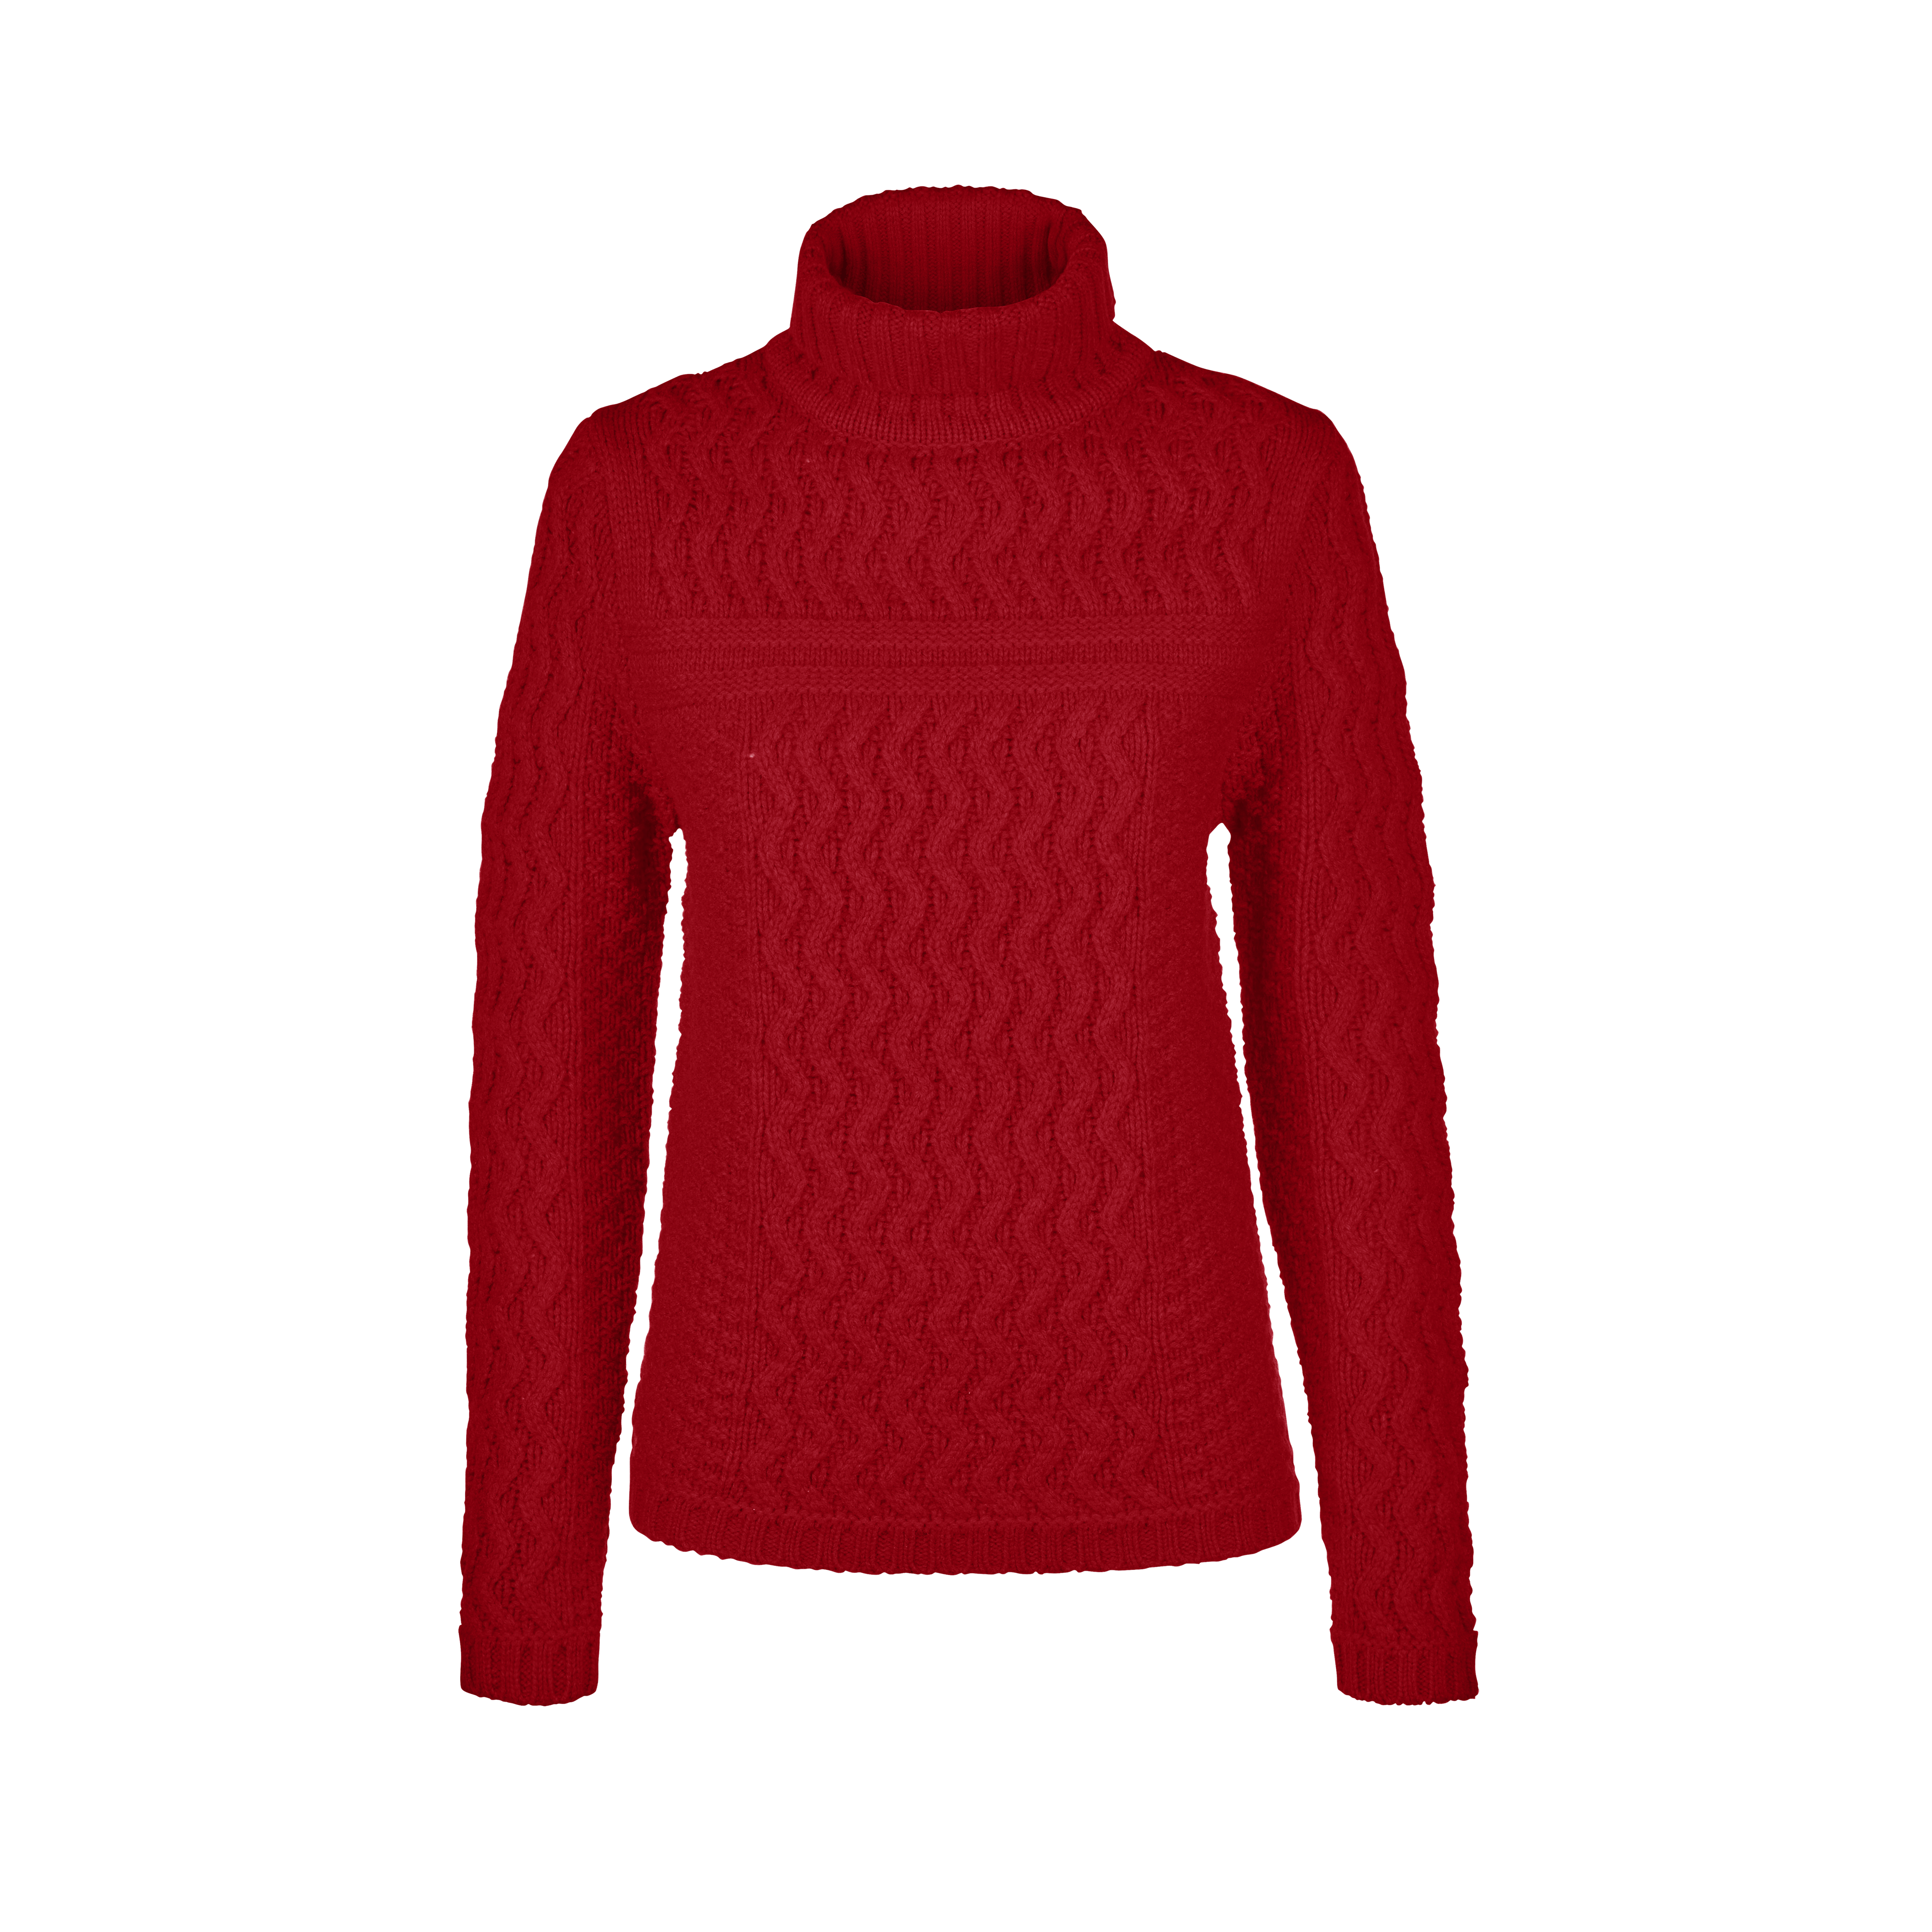 66 North Womens Bylur TopsandVests - Red - S